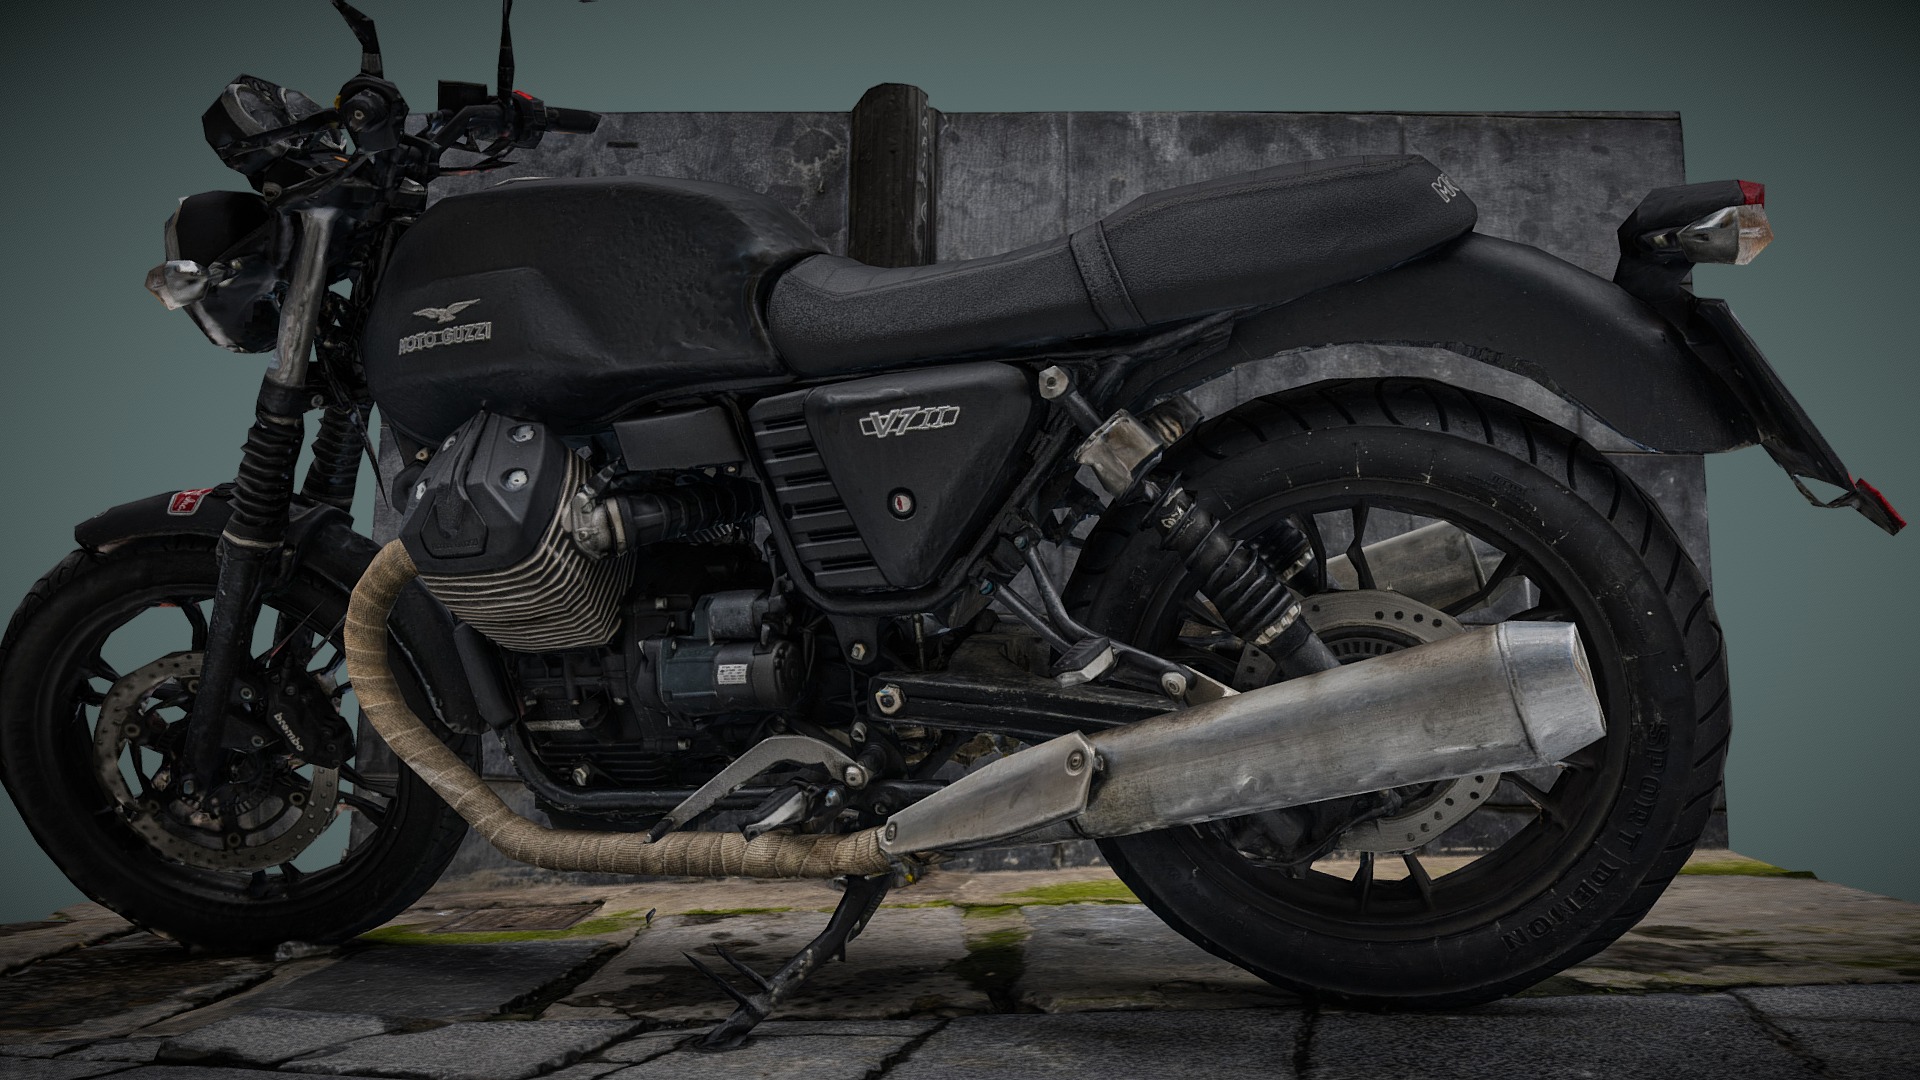 3D model 20K – Moto Guzzi v7 photogrammetry scan remake - This is a 3D model of the 20K - Moto Guzzi v7 photogrammetry scan remake. The 3D model is about a black motorcycle with a black seat.